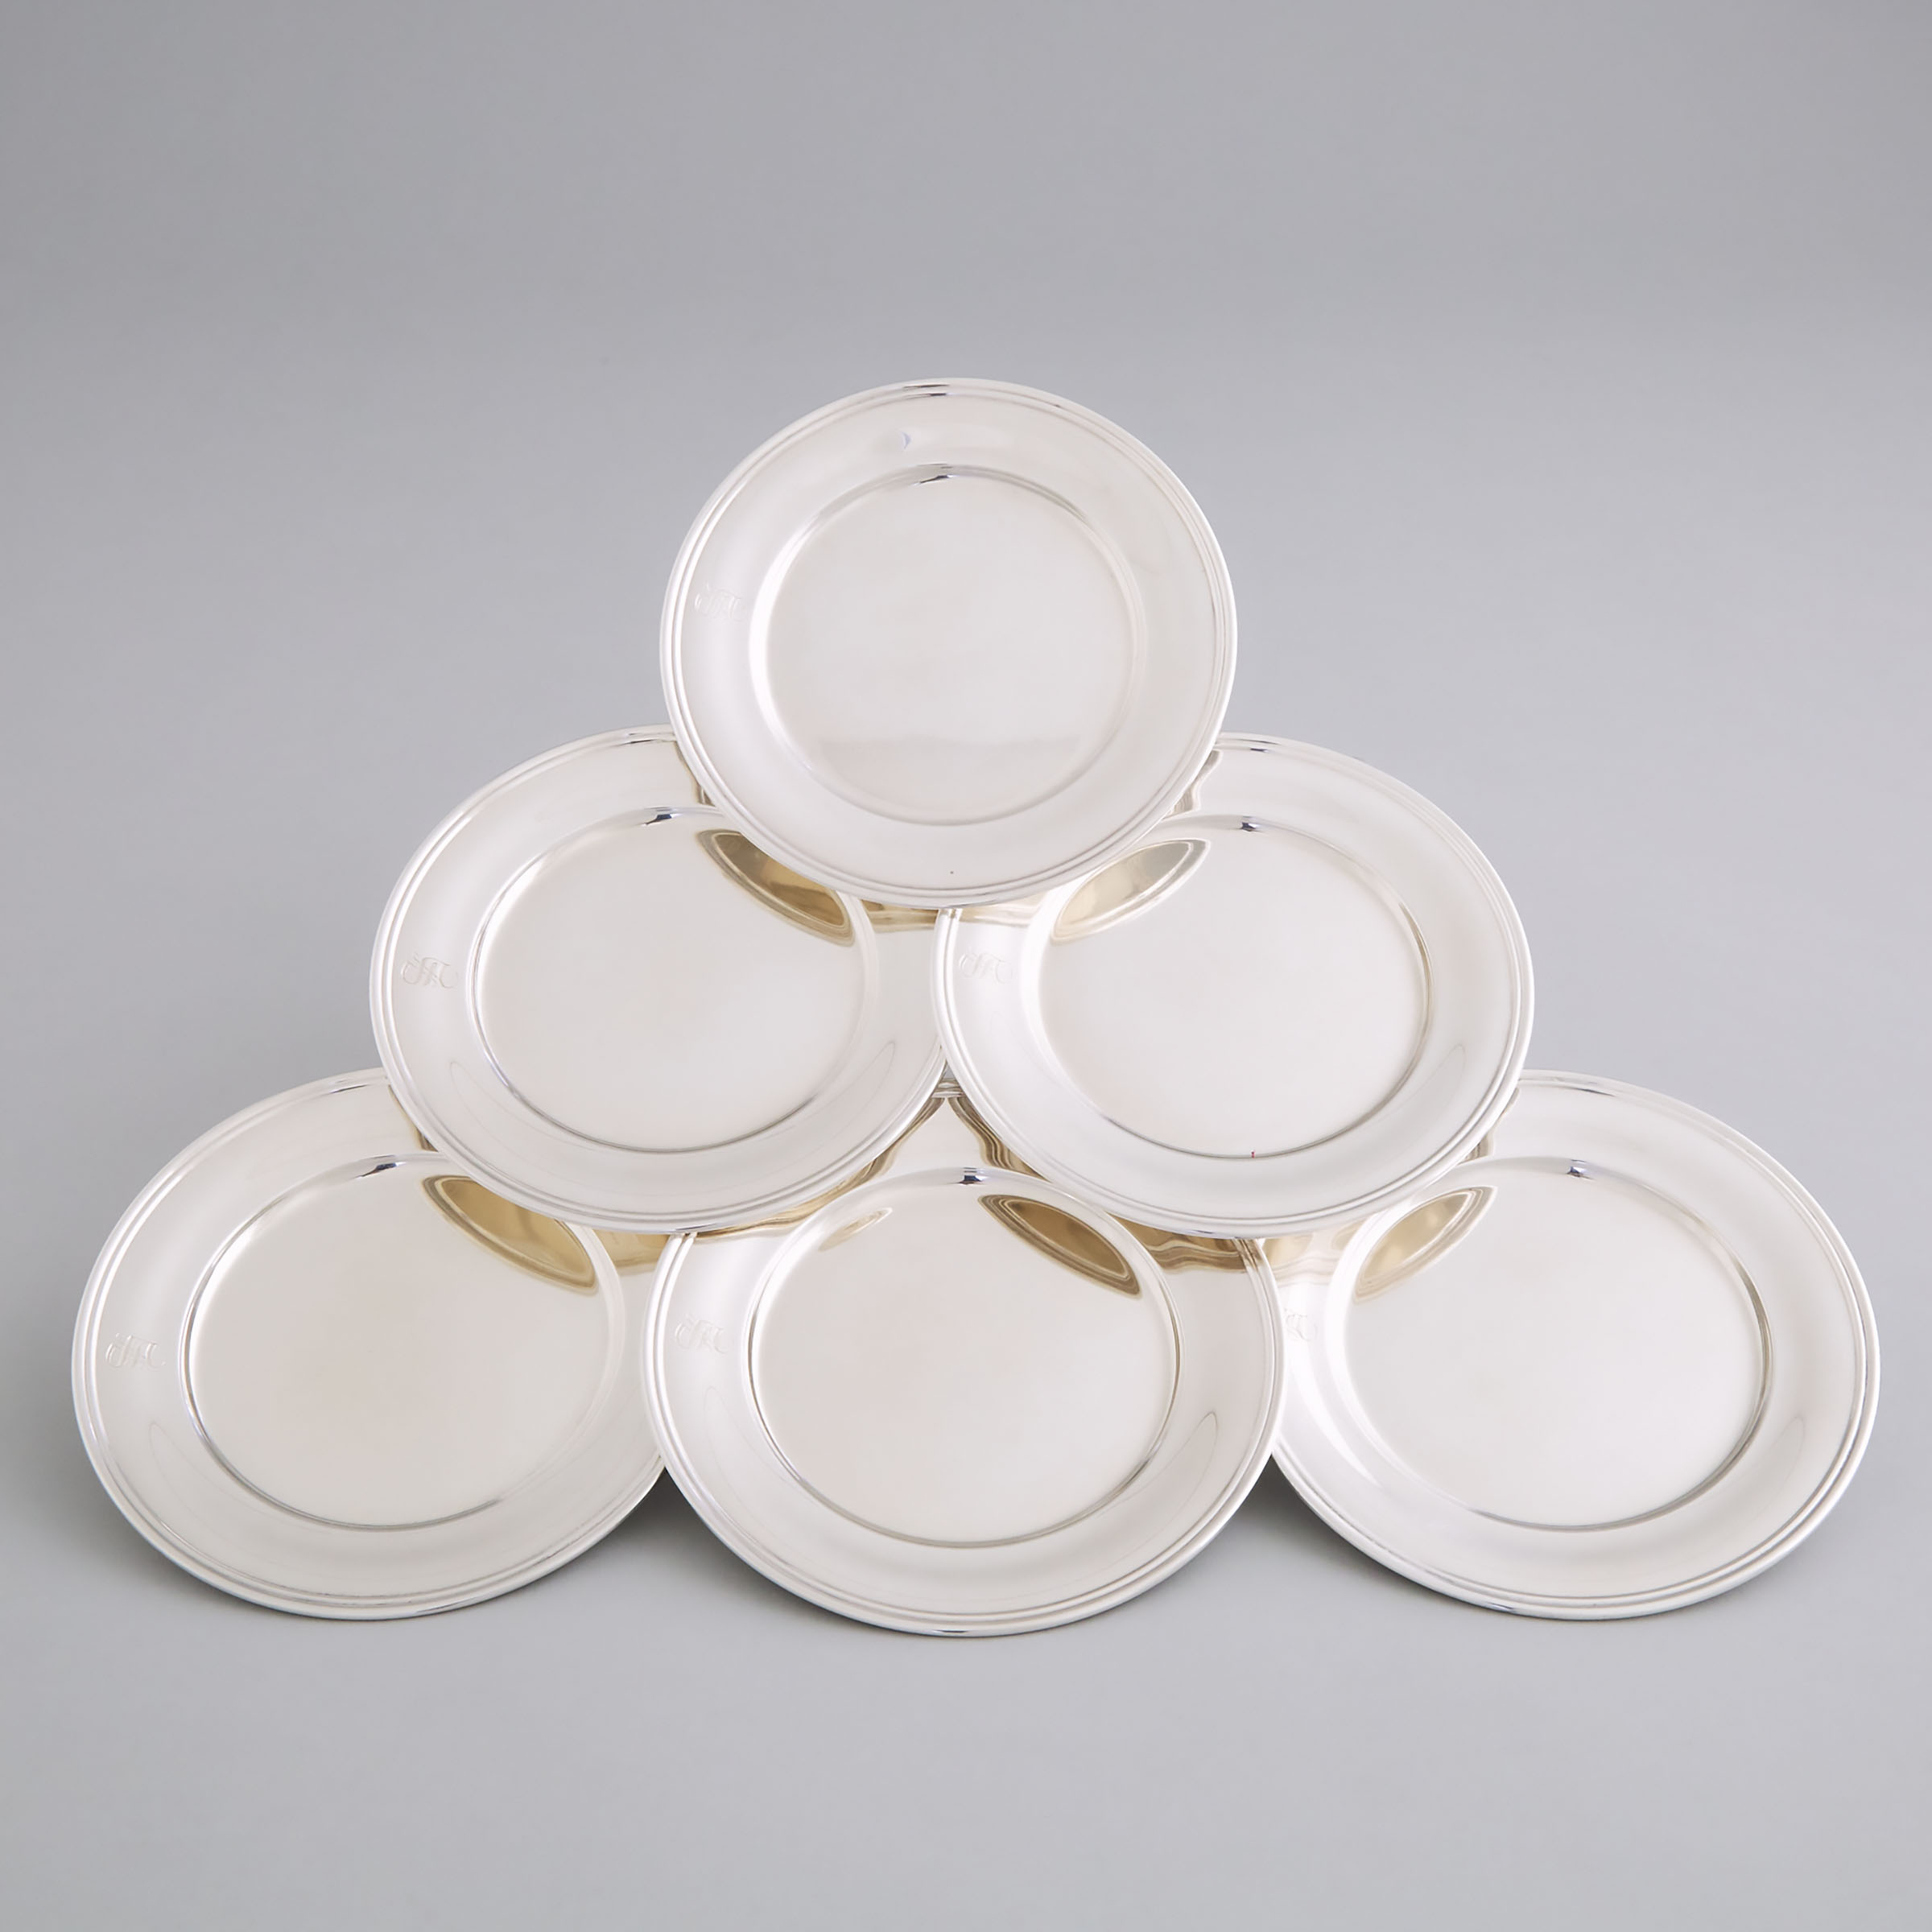 Six American Silver Side Plates, Samuel Kirk & Son Co., Baltimore, Md., 20th century